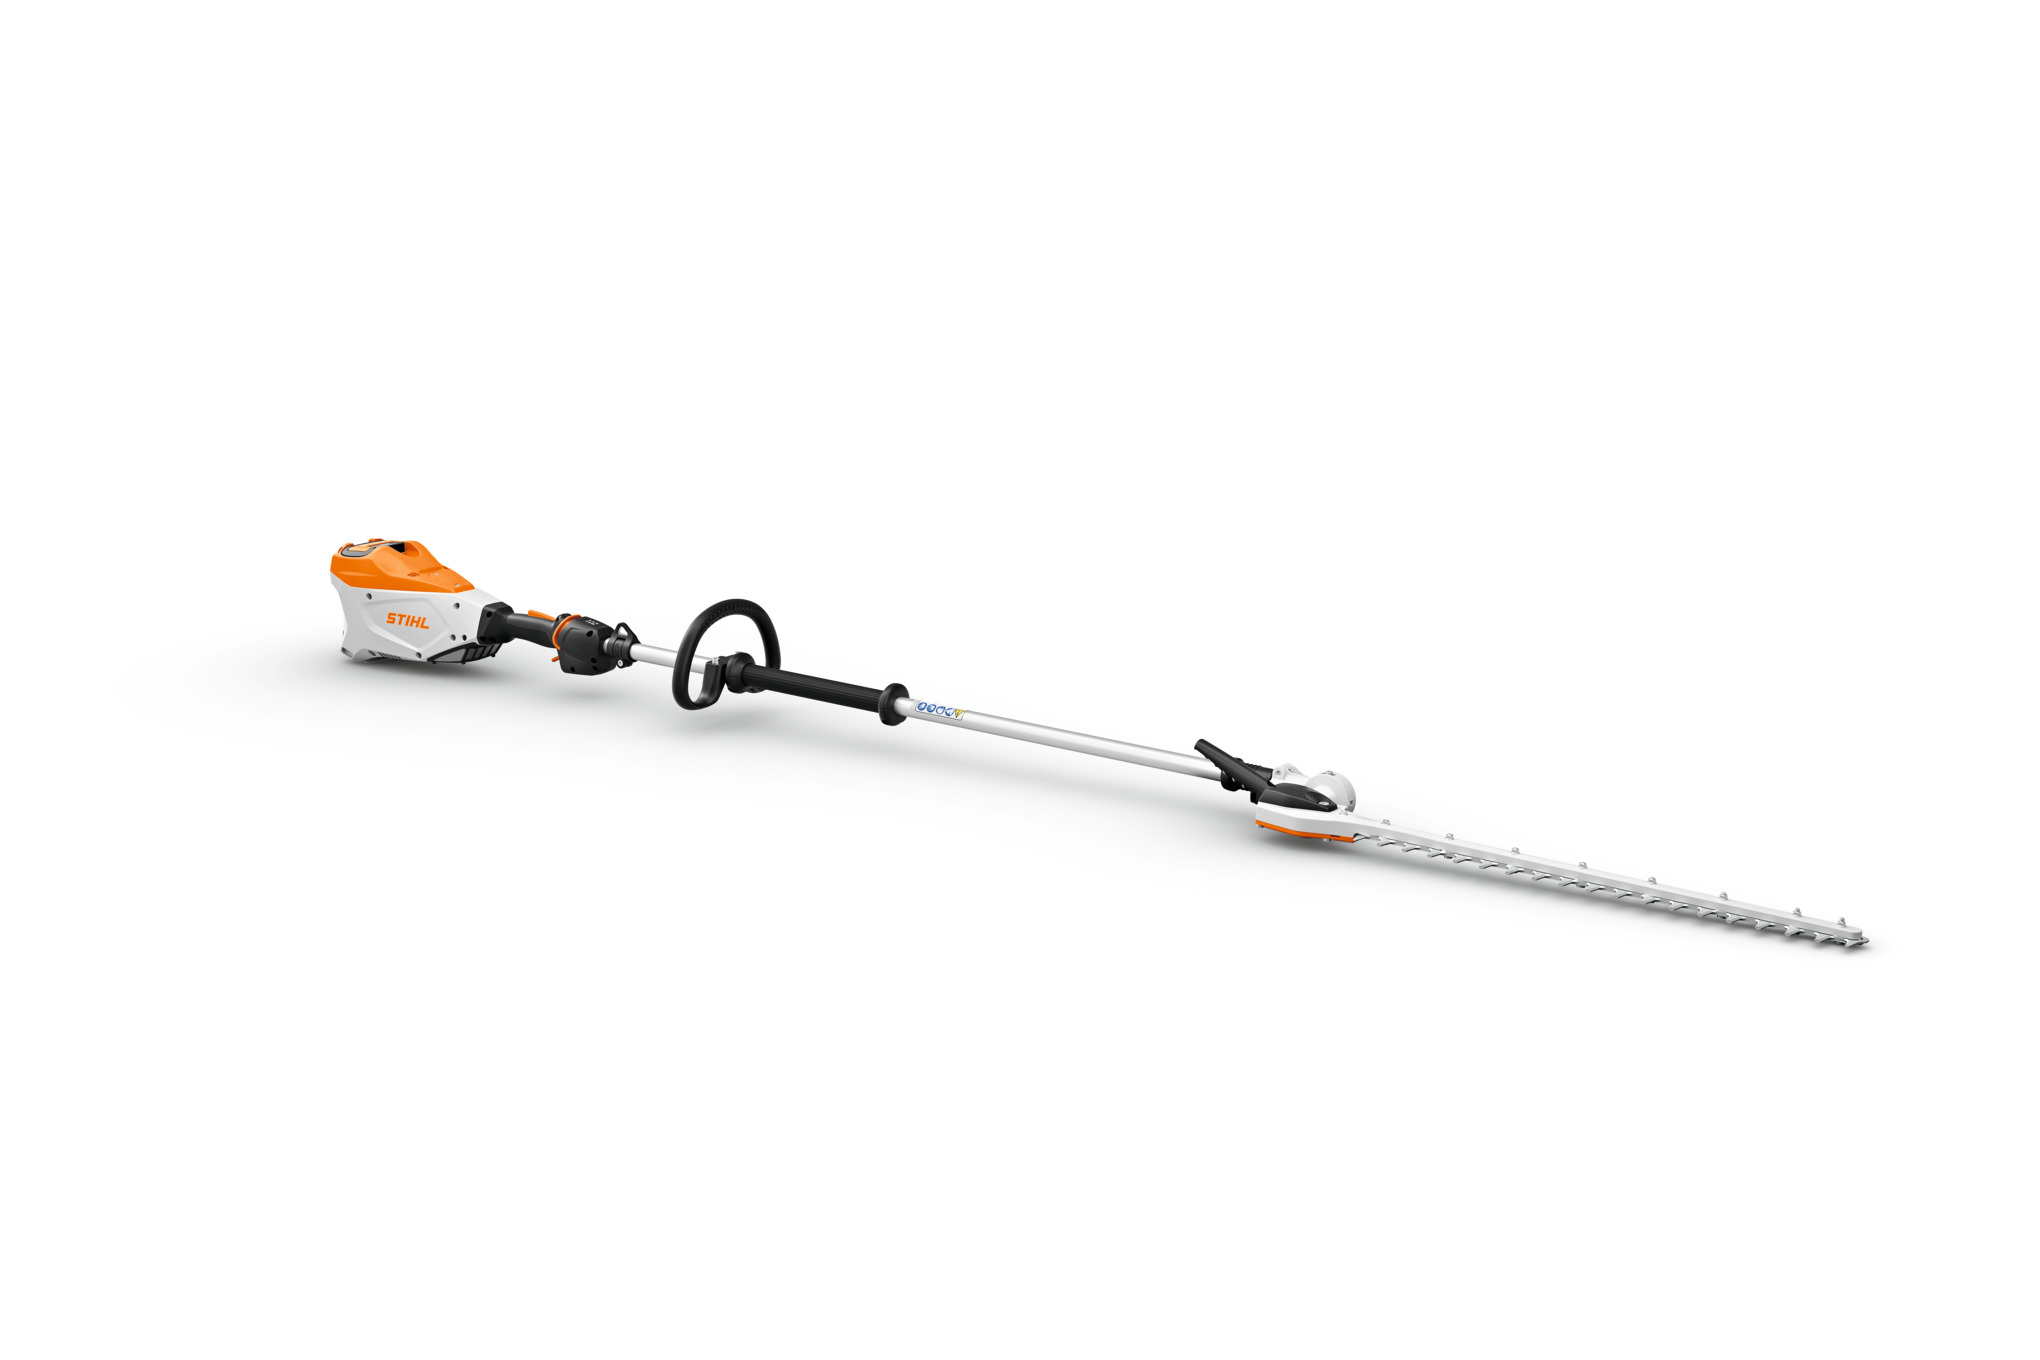 HLA 135 Cordless Long-reach Hedge Trimmer